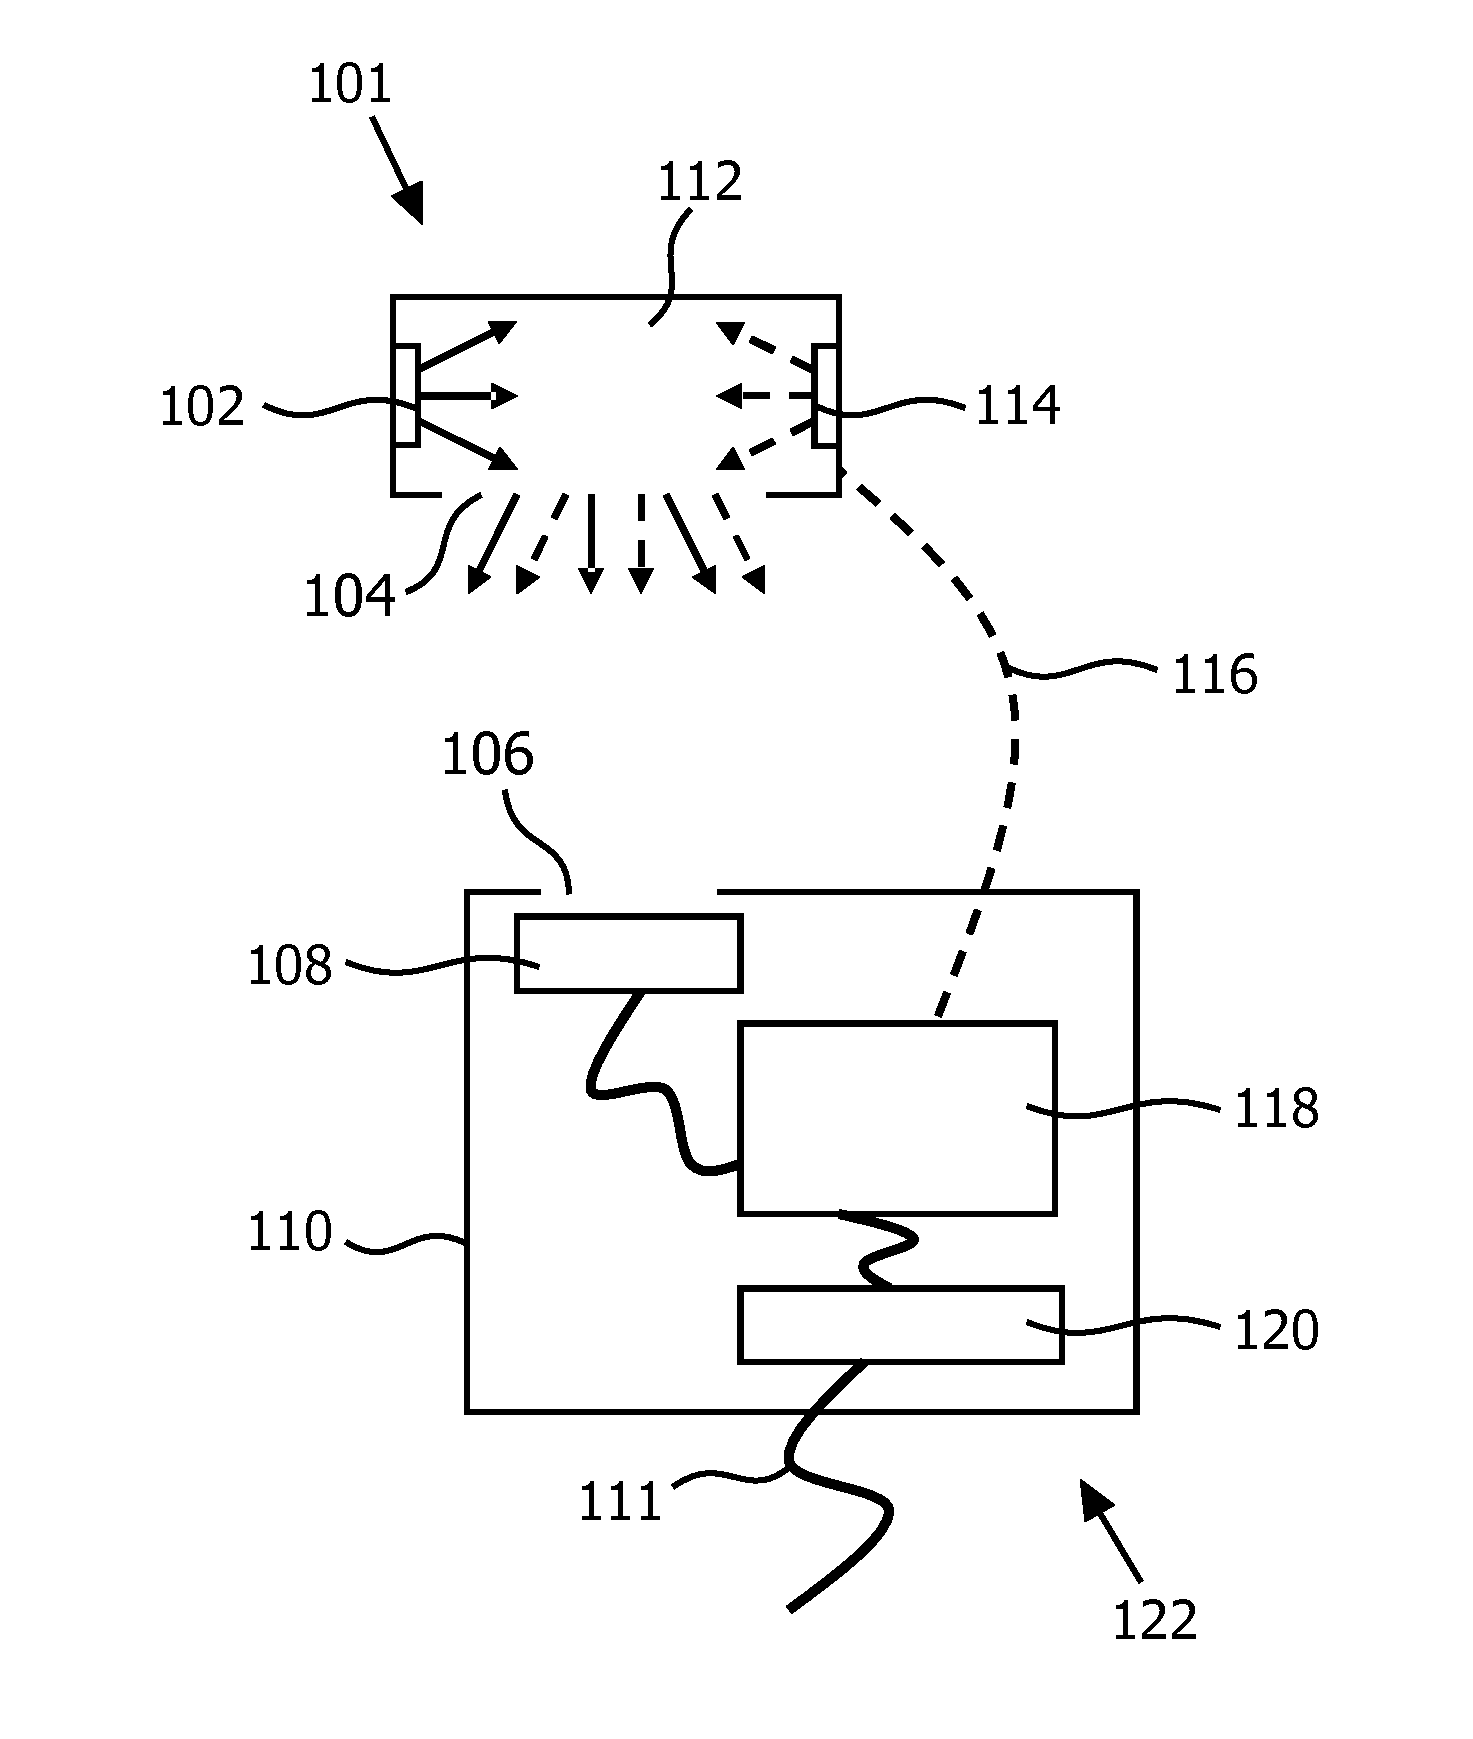 A color tunable lamp including a control device with a relative flux sensor